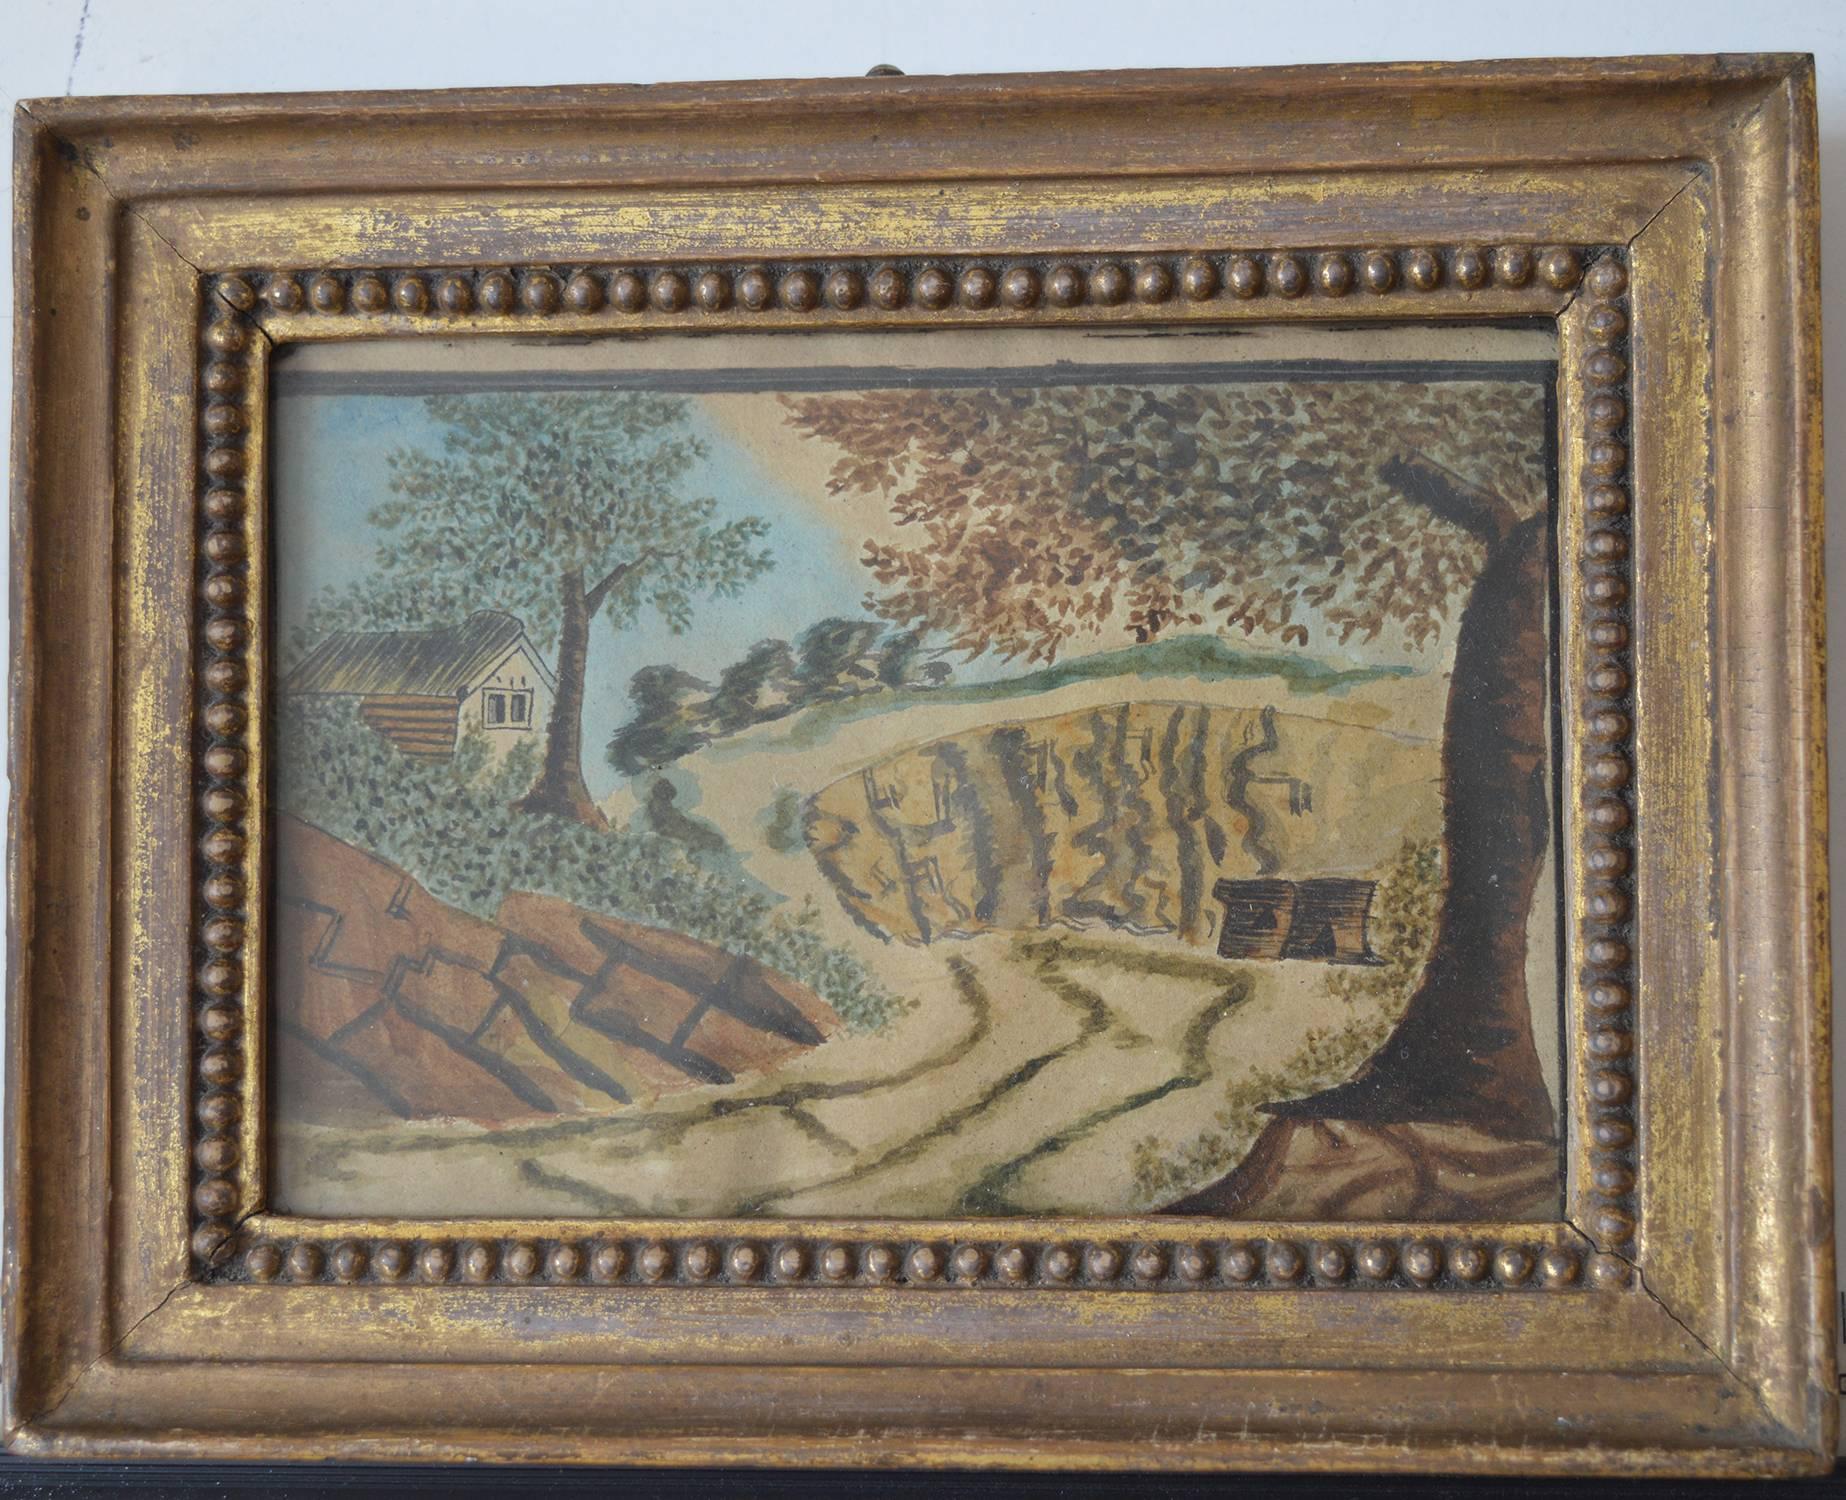 Wonderful primitive or naive image in muted colors.

One of a set of three.

Gouache on paper. Artist unknown.

Original distressed gilt frame.

Untouched at the back.
 